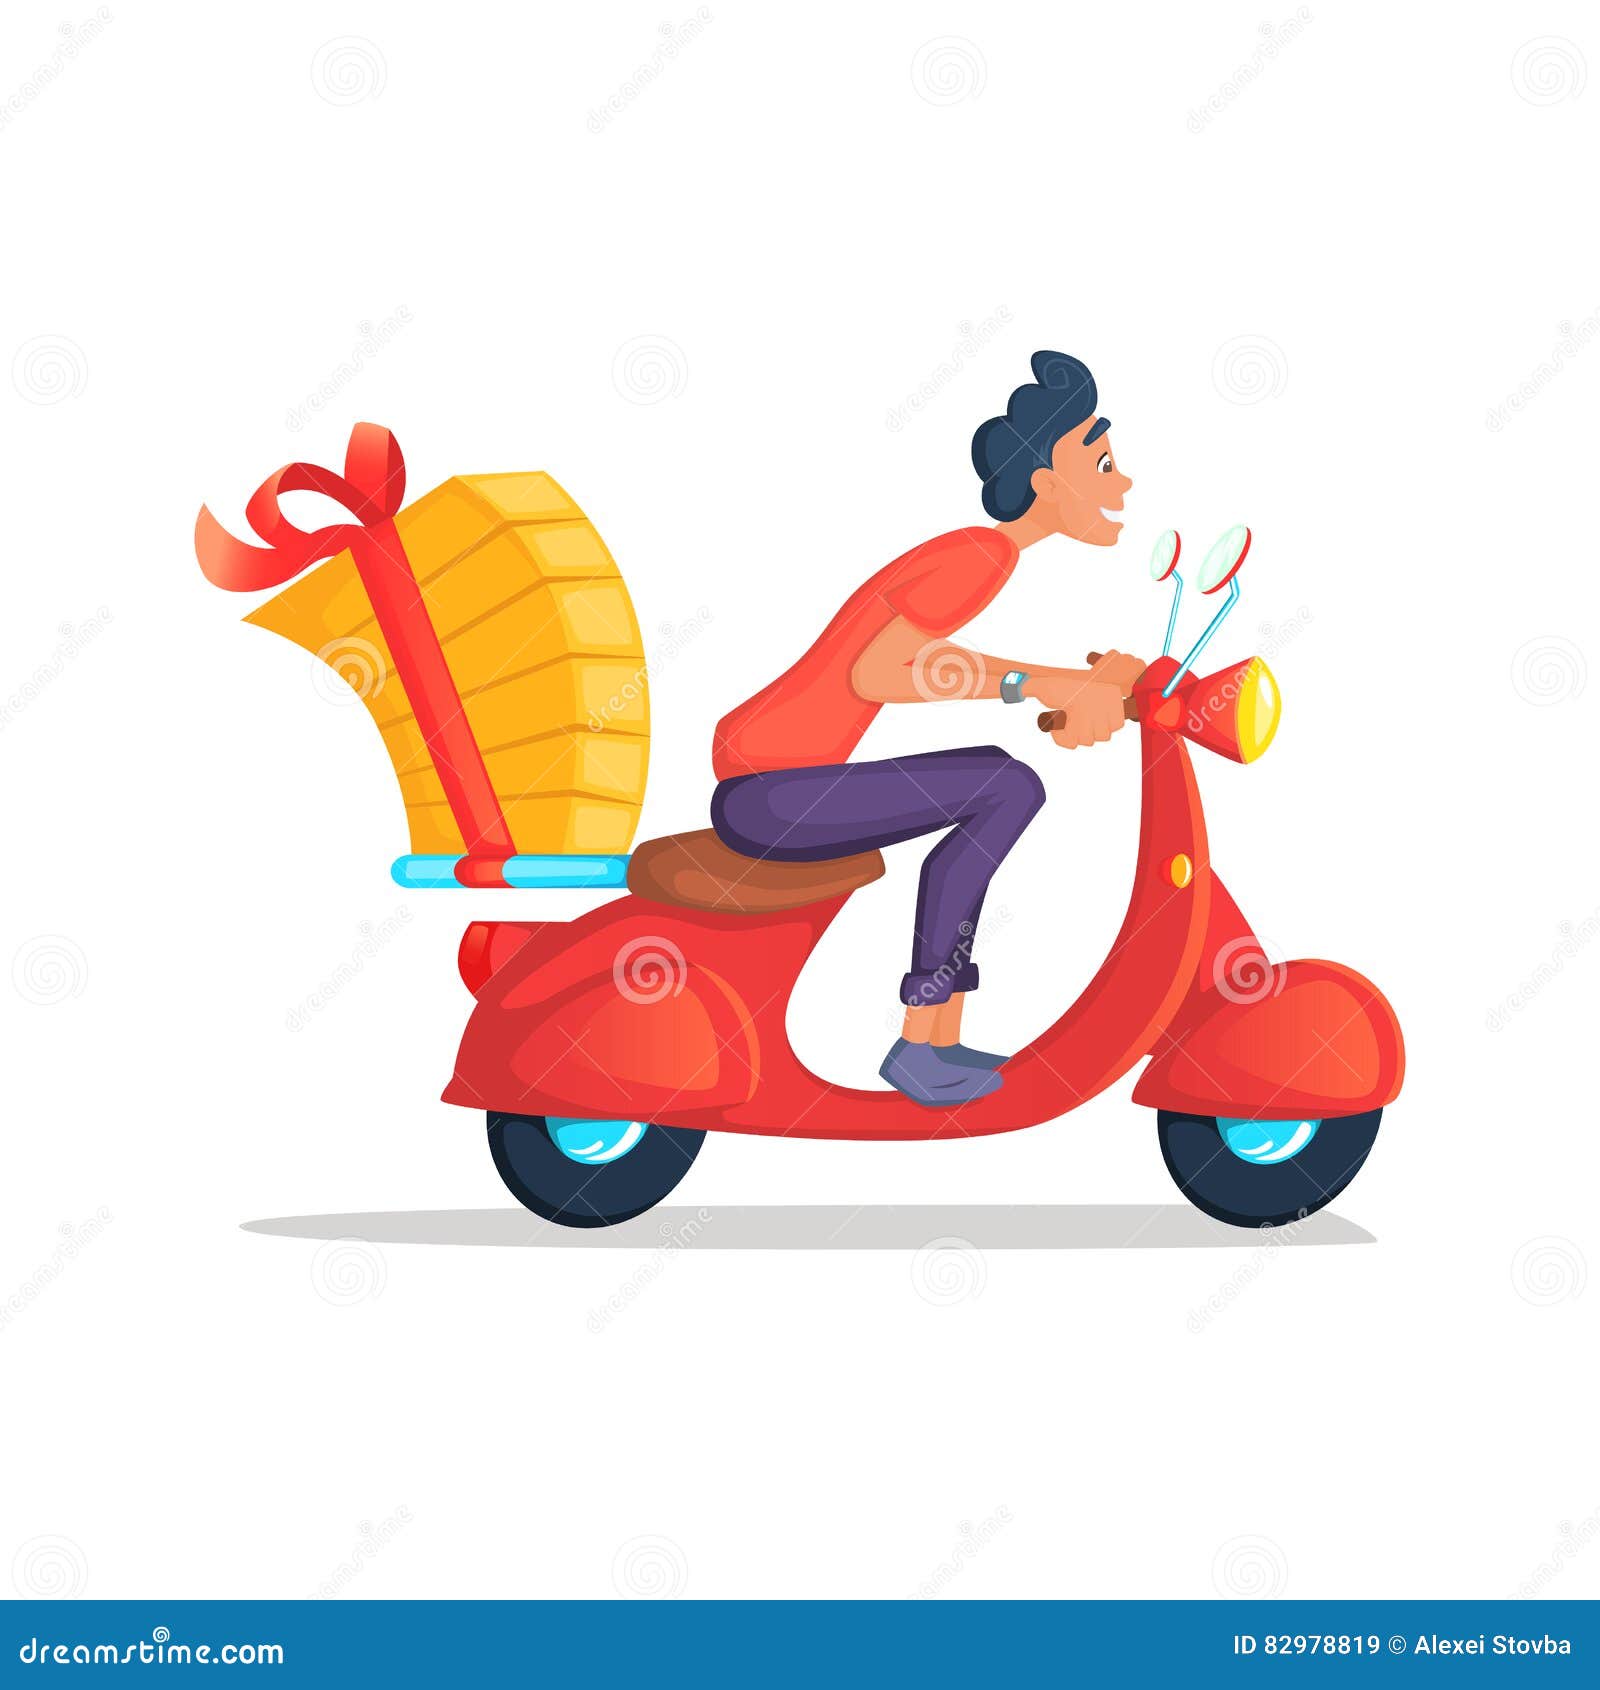 Delivery Boy Ride Scooter Motorcycle Service, Order, Worldwide Shipping,  Fast and Free Transport. Cartoon Vector Stock Vector - Illustration of  design, drive: 82978819